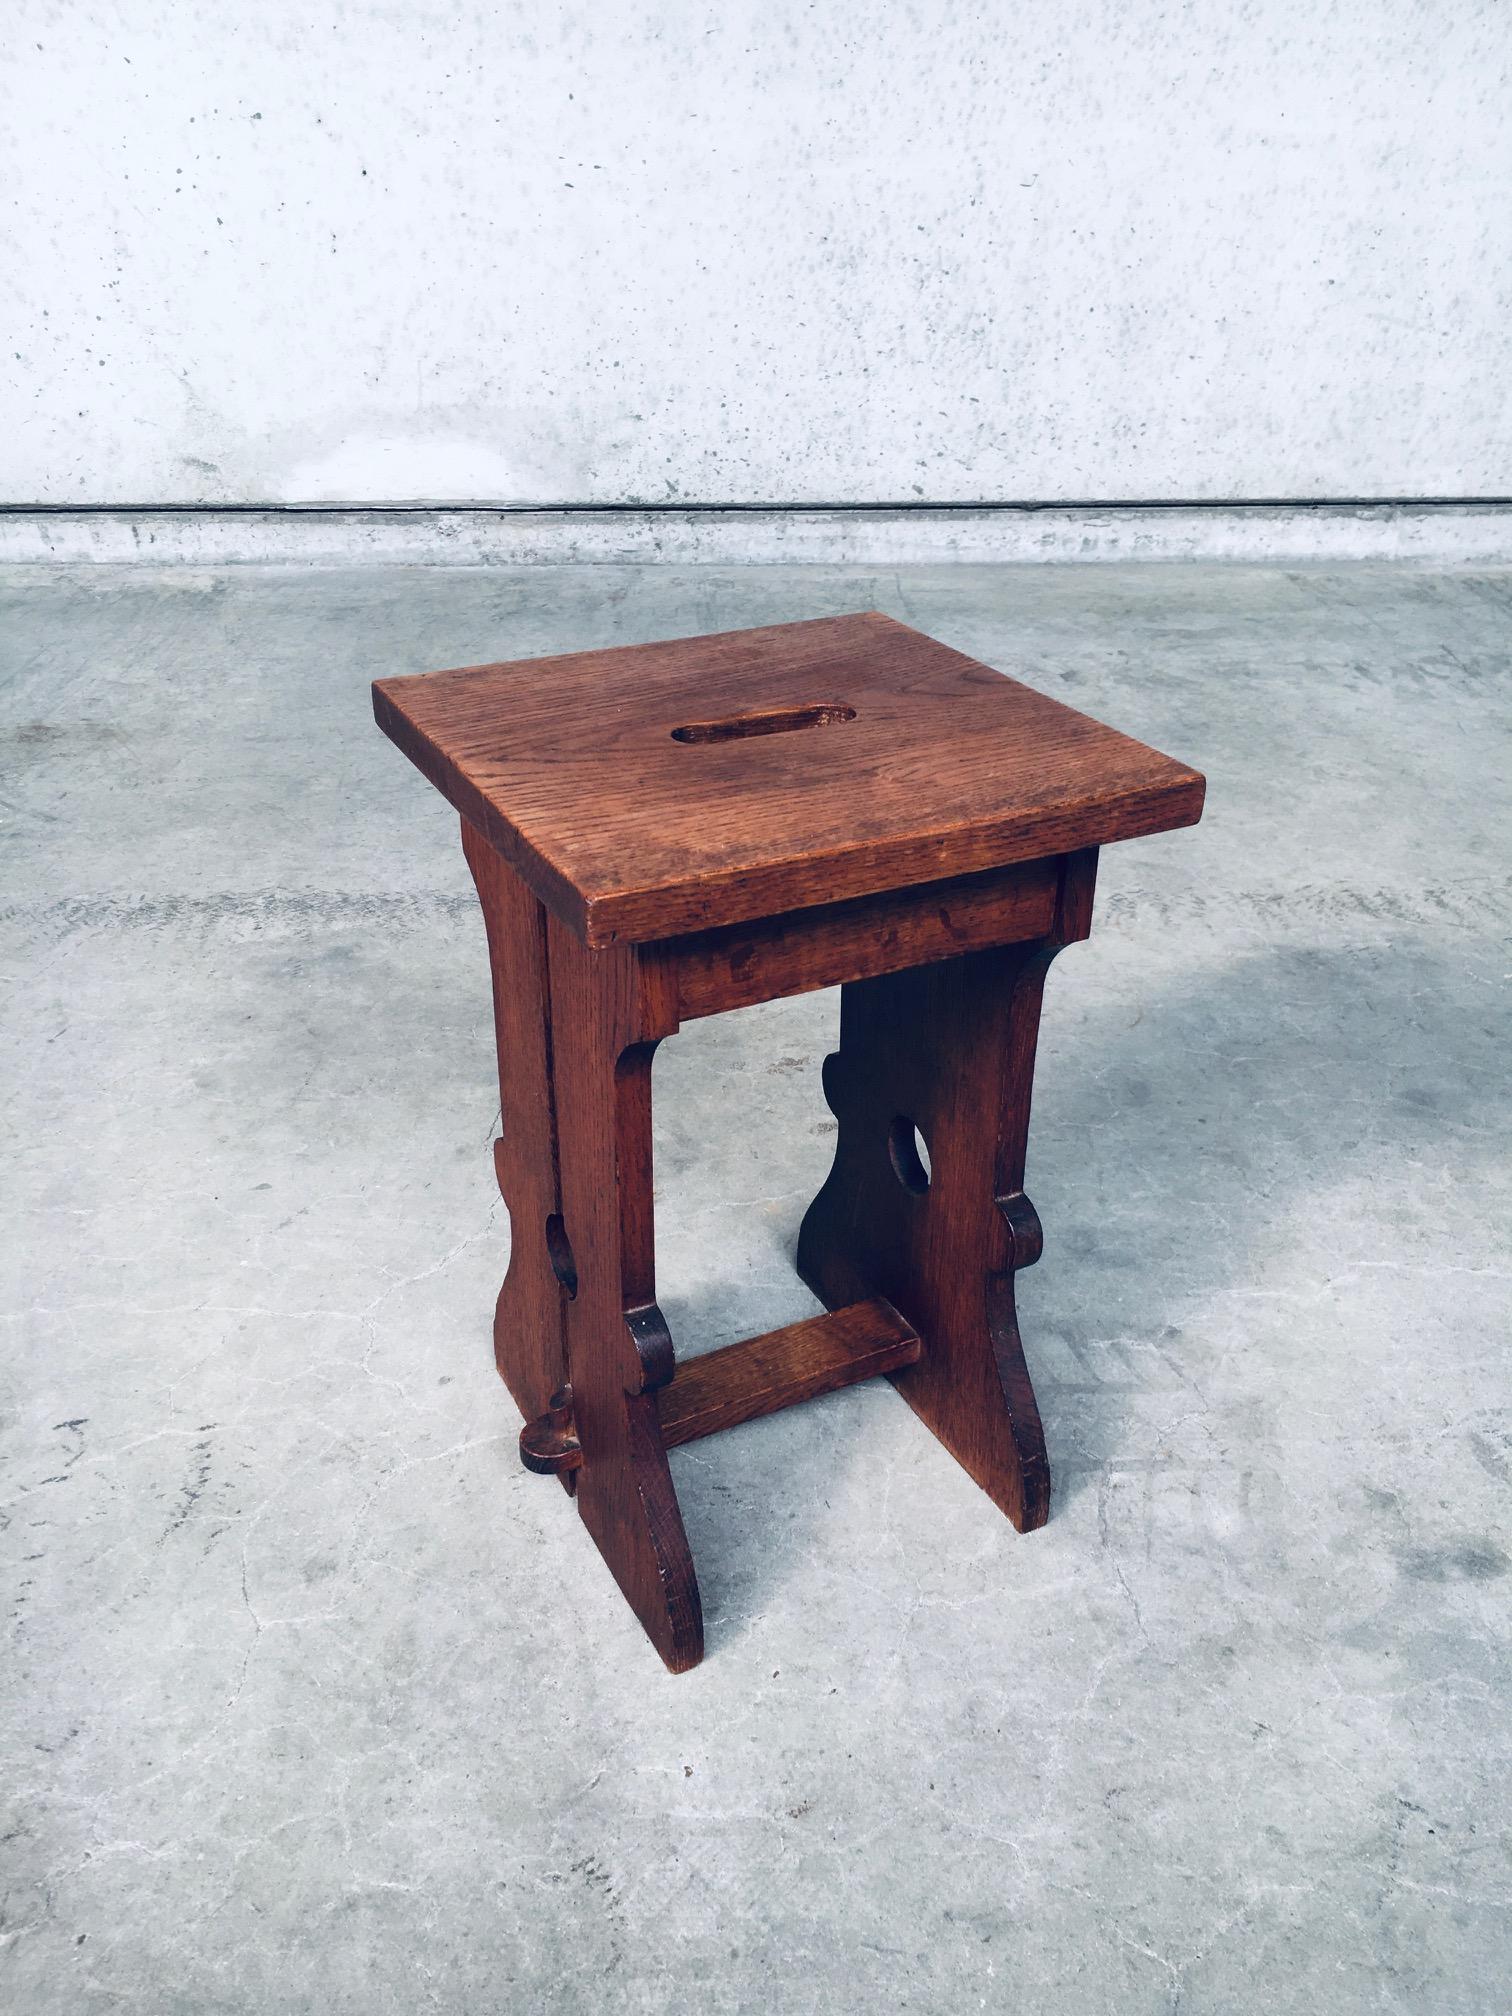 Early 20th Century Amsterdamse School Design Oak Handle Stool, 1920's Netherlands For Sale